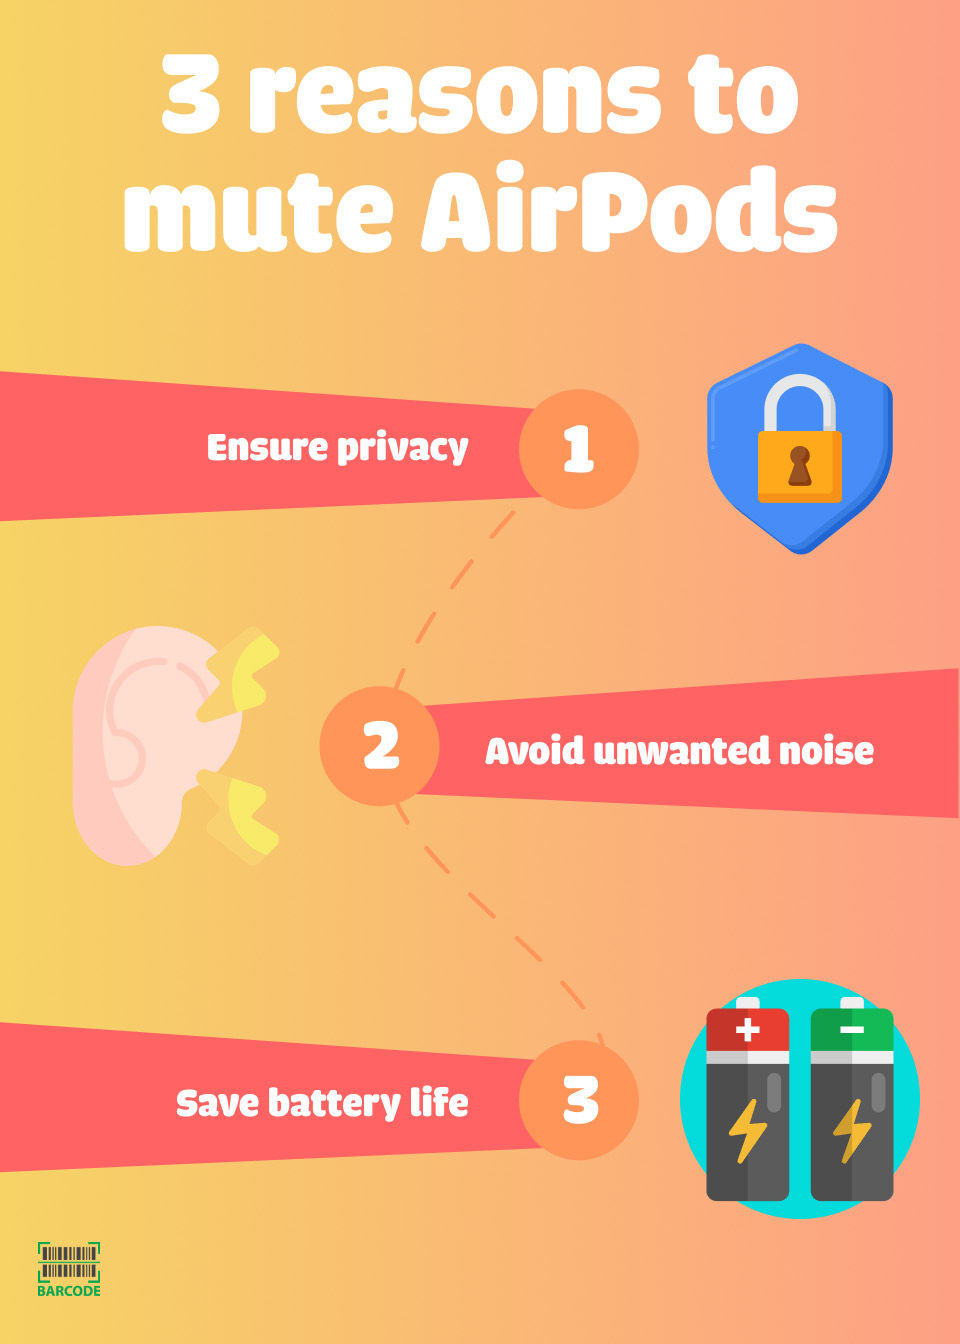 Reasons to mute AirPods